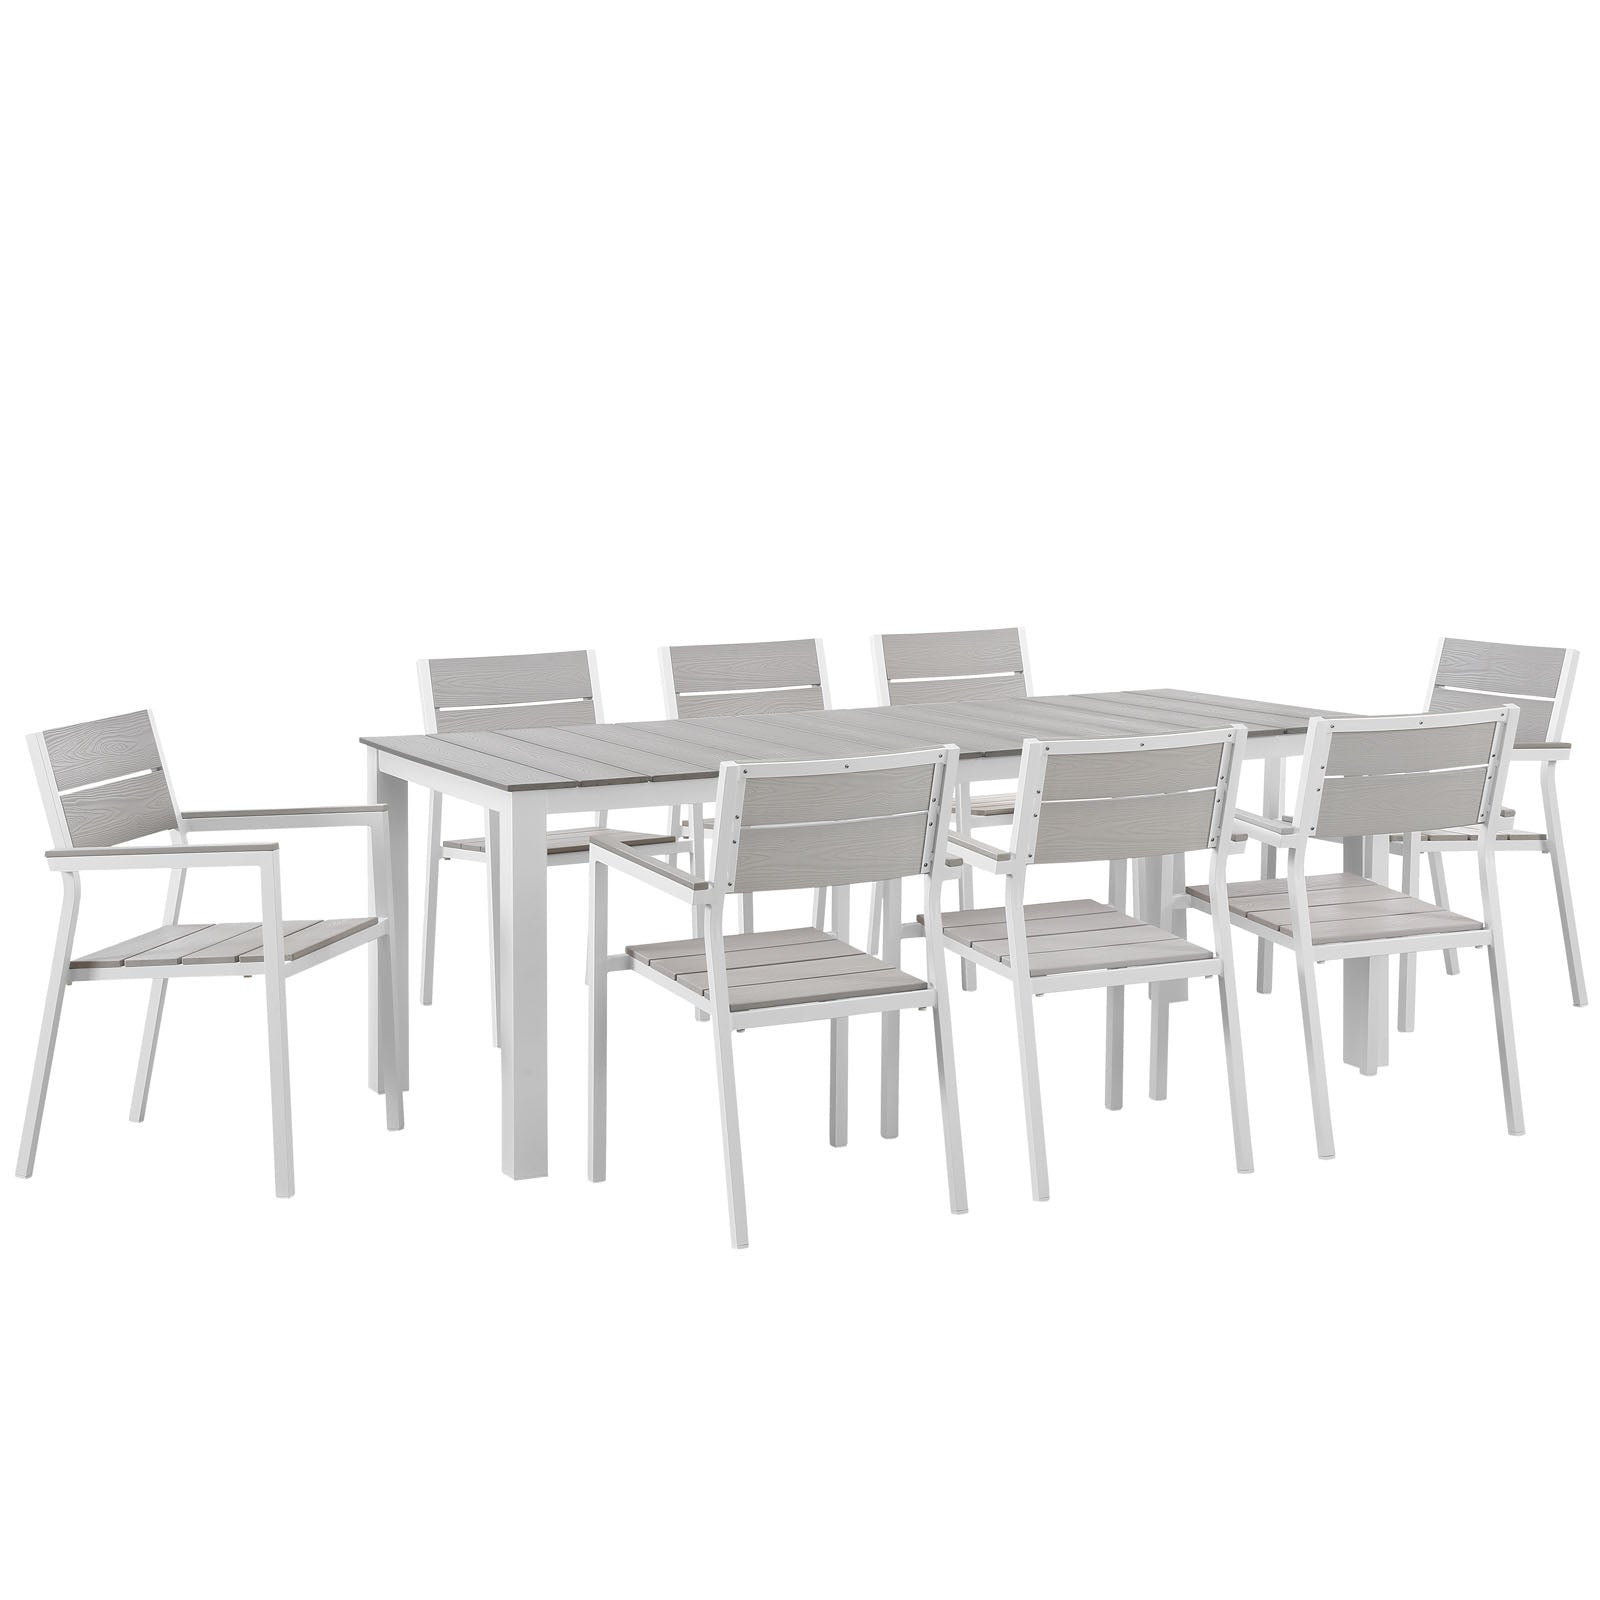 Maine 9 Piece Outdoor Patio Dining Set - East Shore Modern Home Furnishings